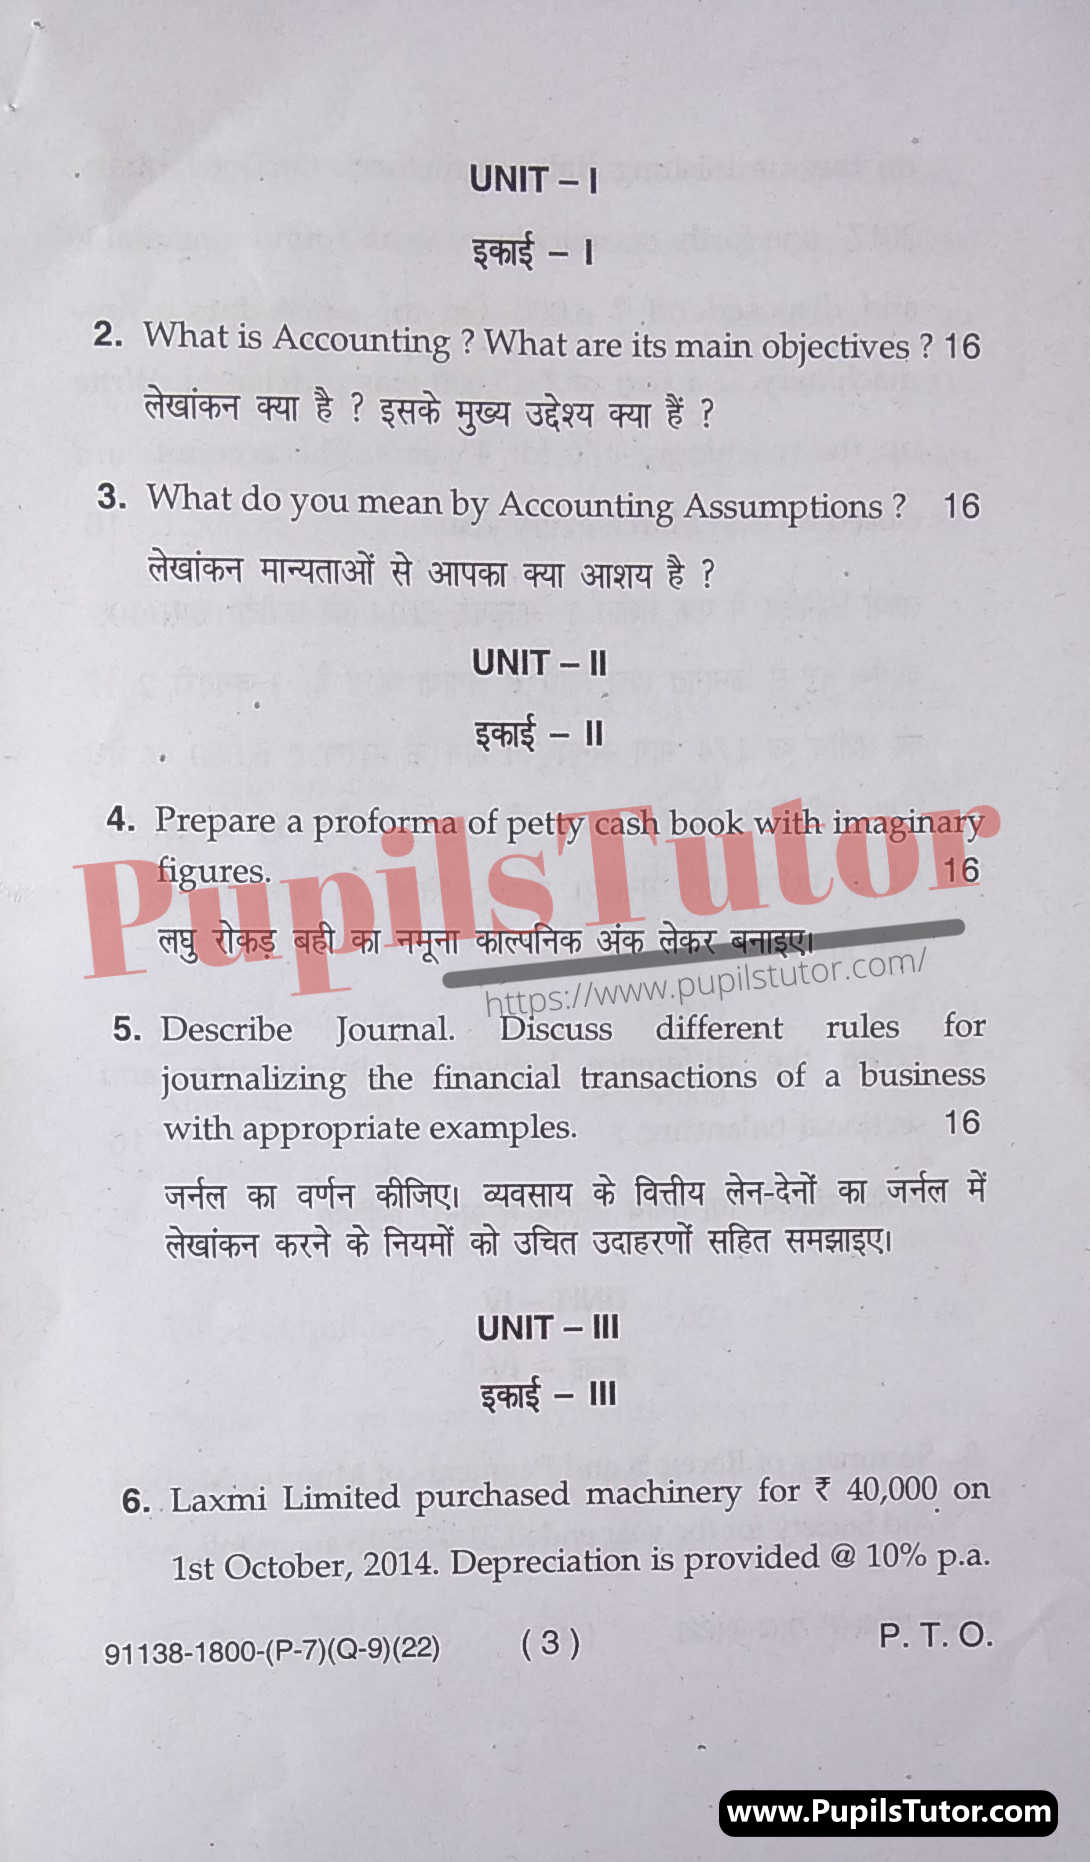 Free Download PDF Of M.D. University B.Com. First Semester Latest Question Paper For An Introduction To Accounting Subject (Page 3) - https://www.pupilstutor.com